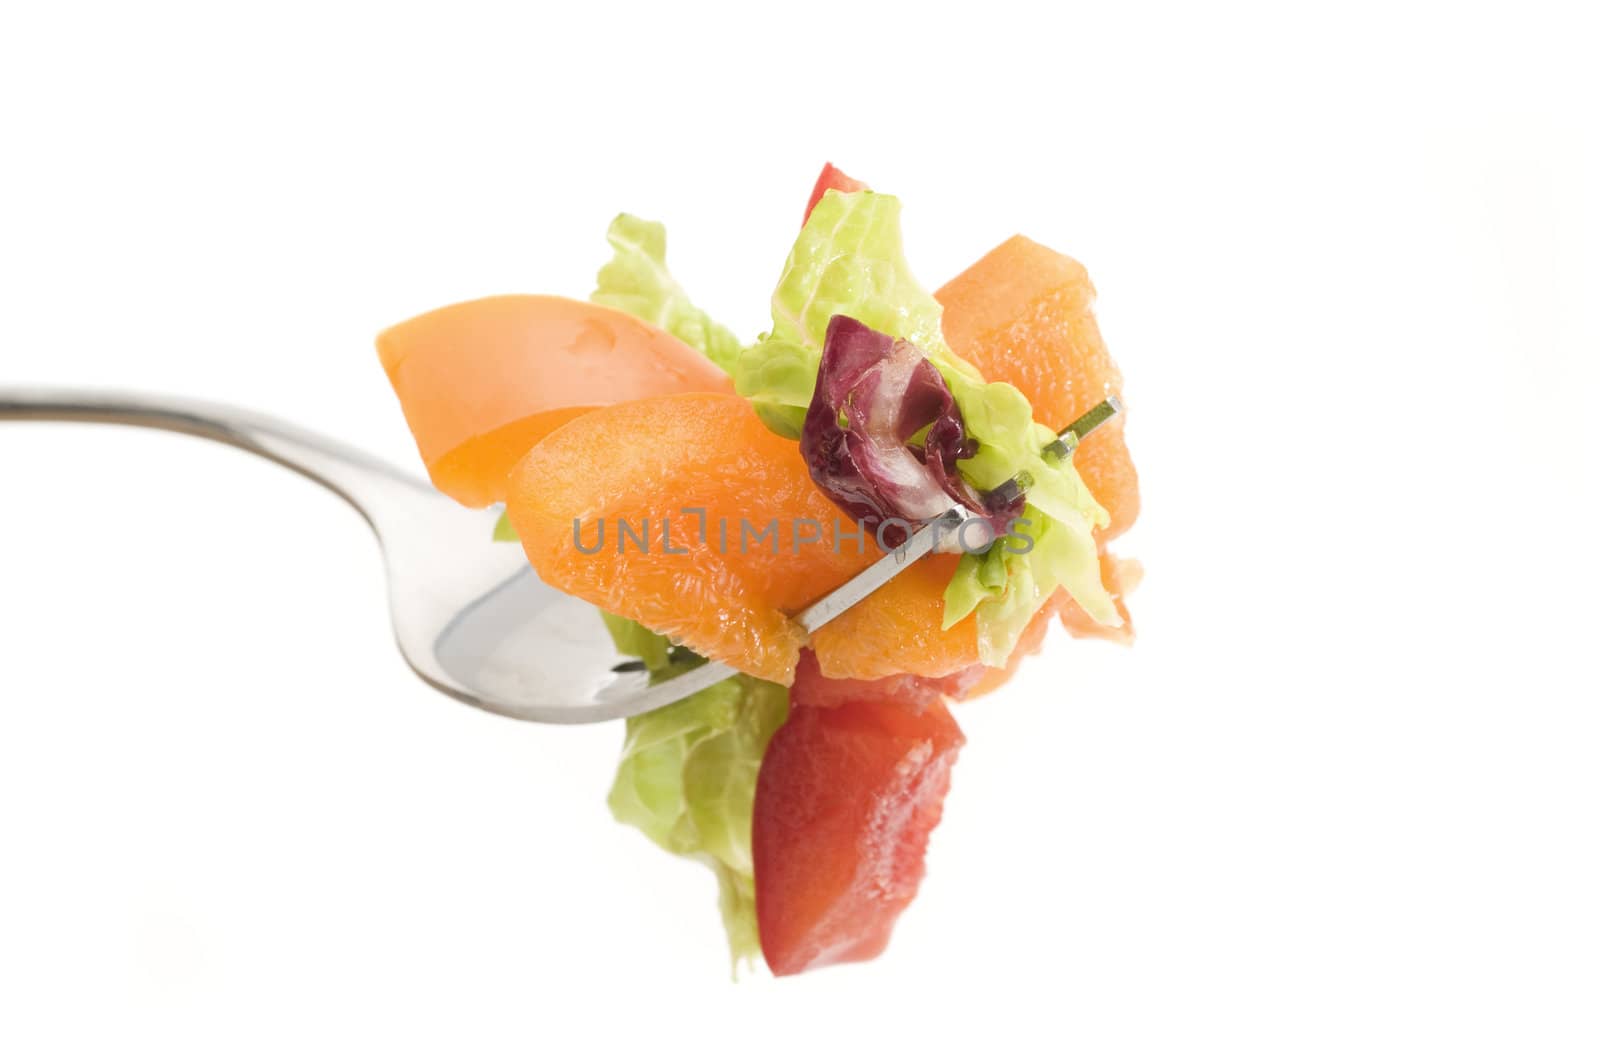 Selective focus on the foreground items on the fork of veggies with white background